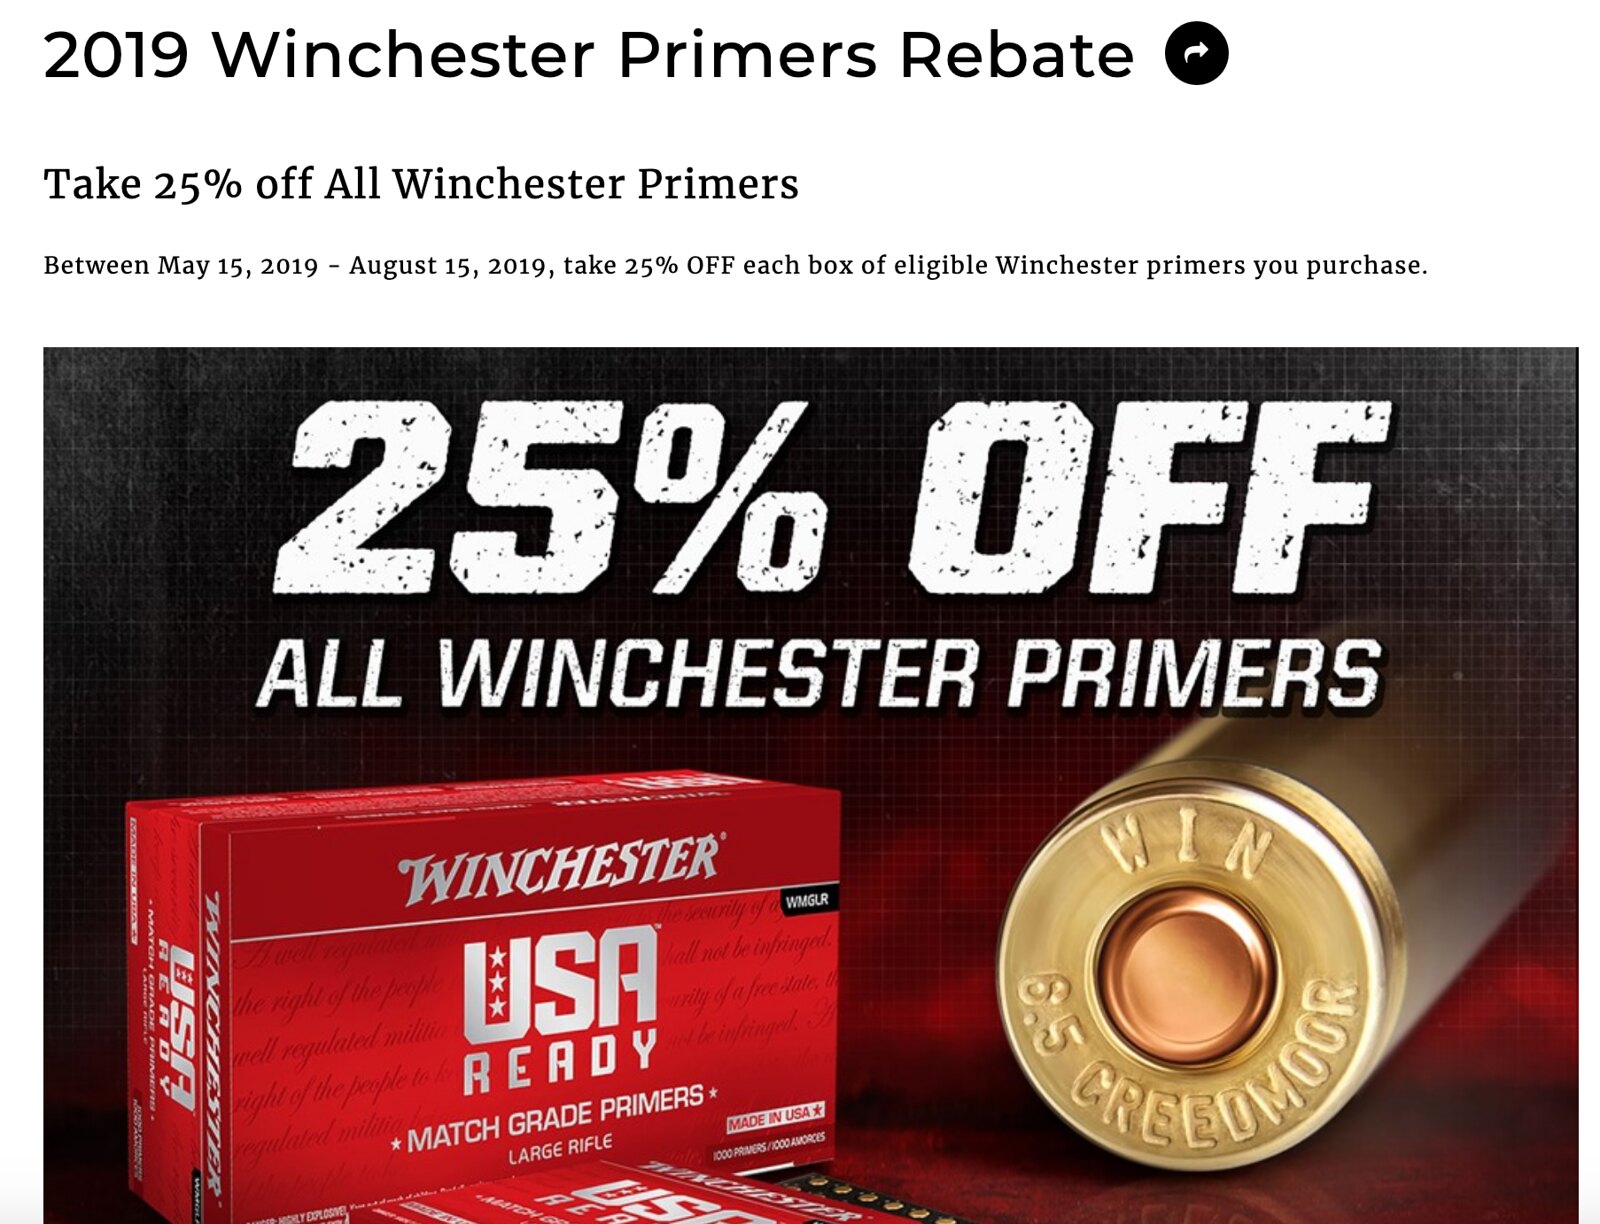 earn-up-to-100-rebate-from-winchester-ammo-wireshots